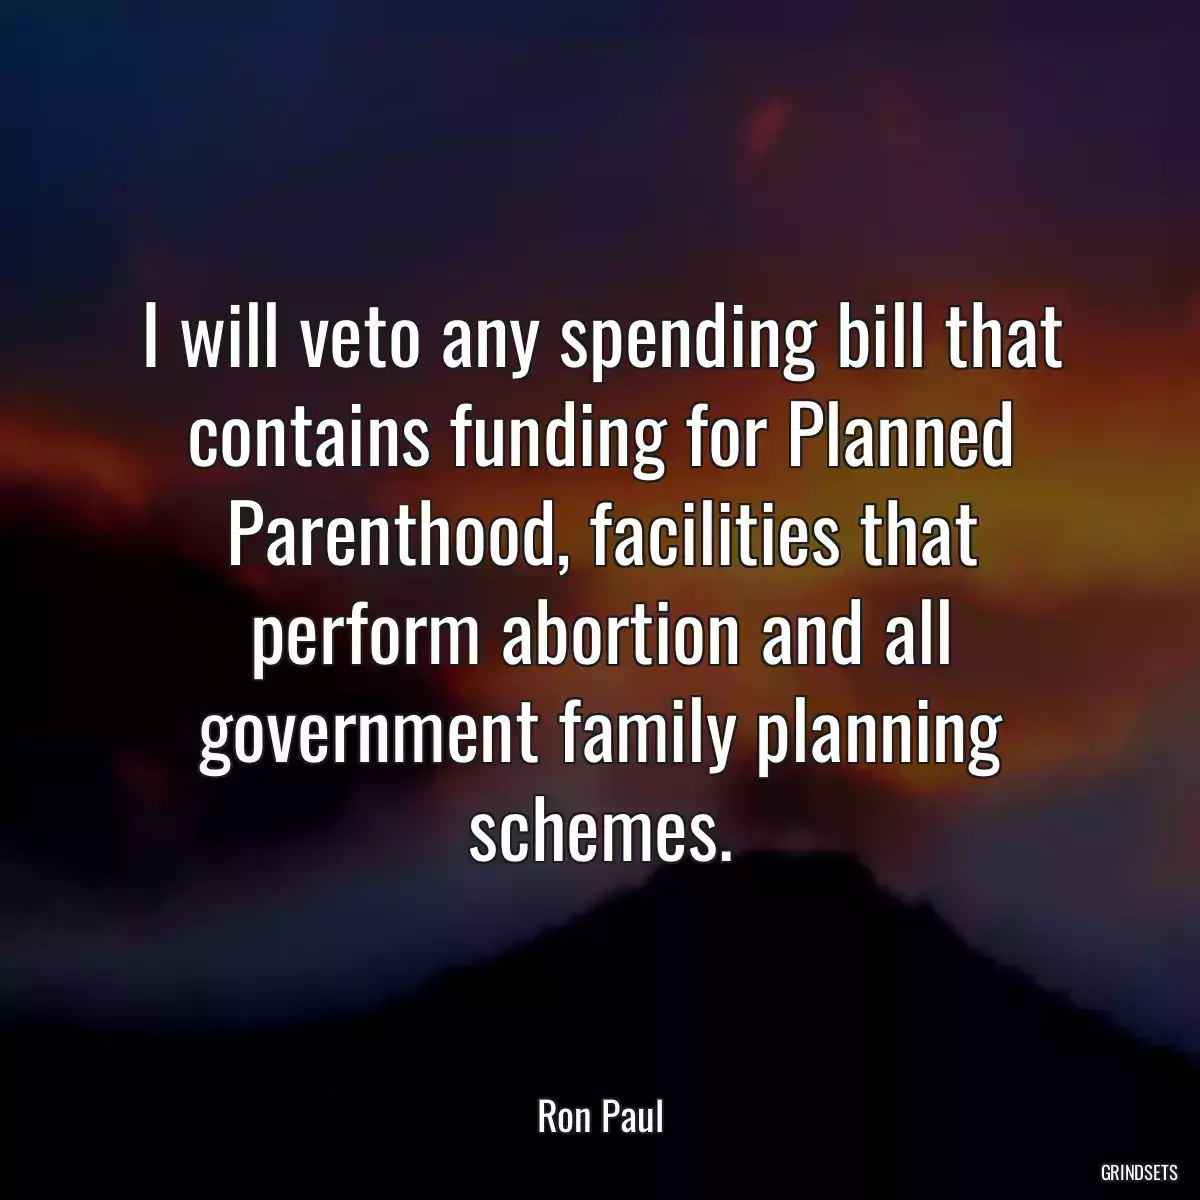 I will veto any spending bill that contains funding for Planned Parenthood, facilities that perform abortion and all government family planning schemes.